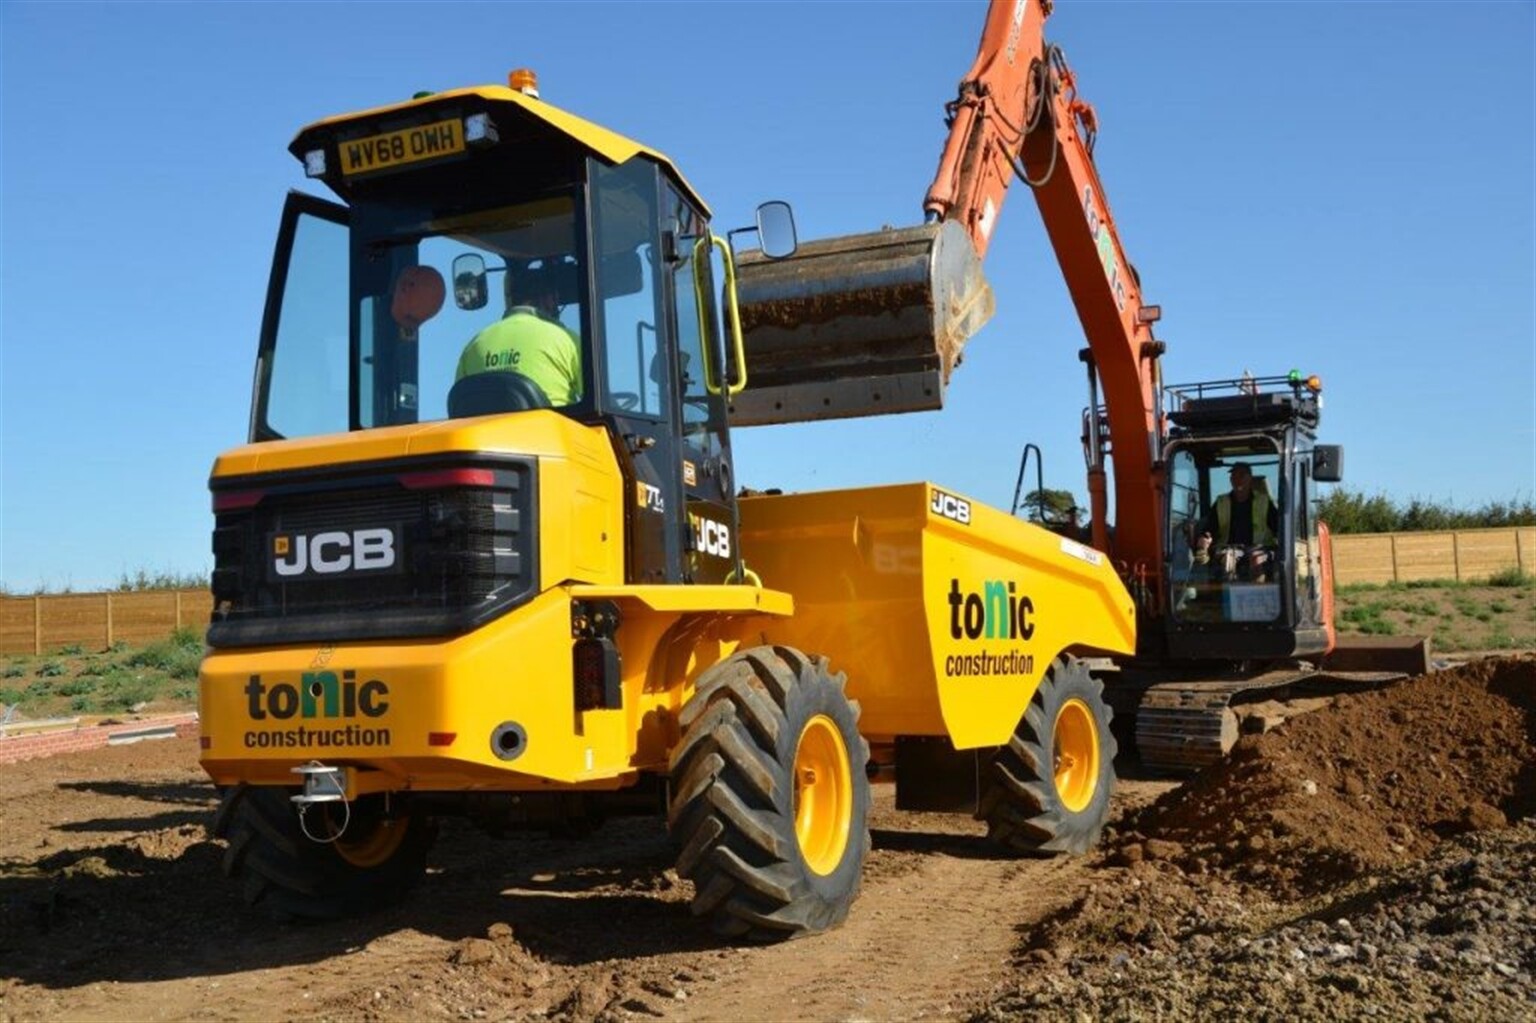 Hi-Viz takes dumper safety to another level for Tonic